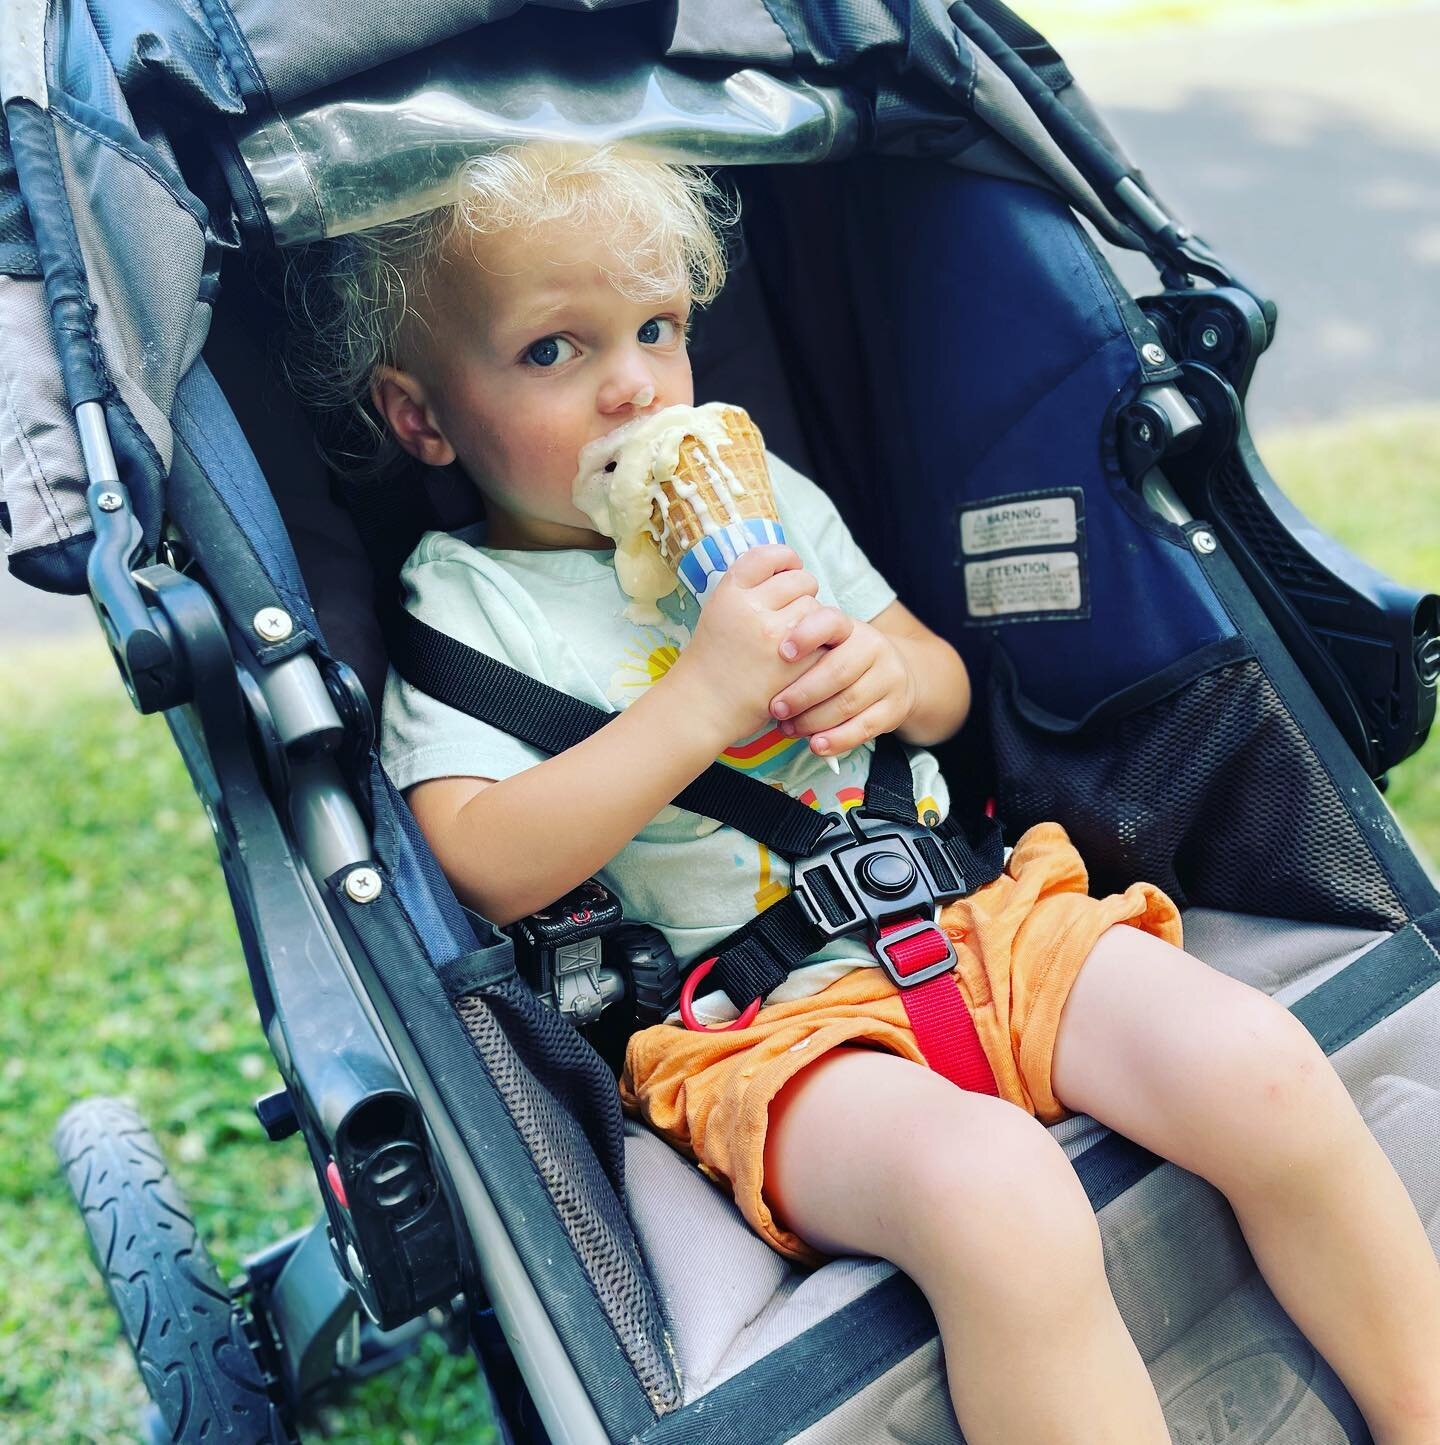 Shared an ice cream cone with my boy. I&rsquo;m so awed by his natural intuitive eating abilities. He enjoyed a few bites of ice cream (I think mostly because it was so much fun to eat and such a mess) then passed it back to mom when he&rsquo;d had e